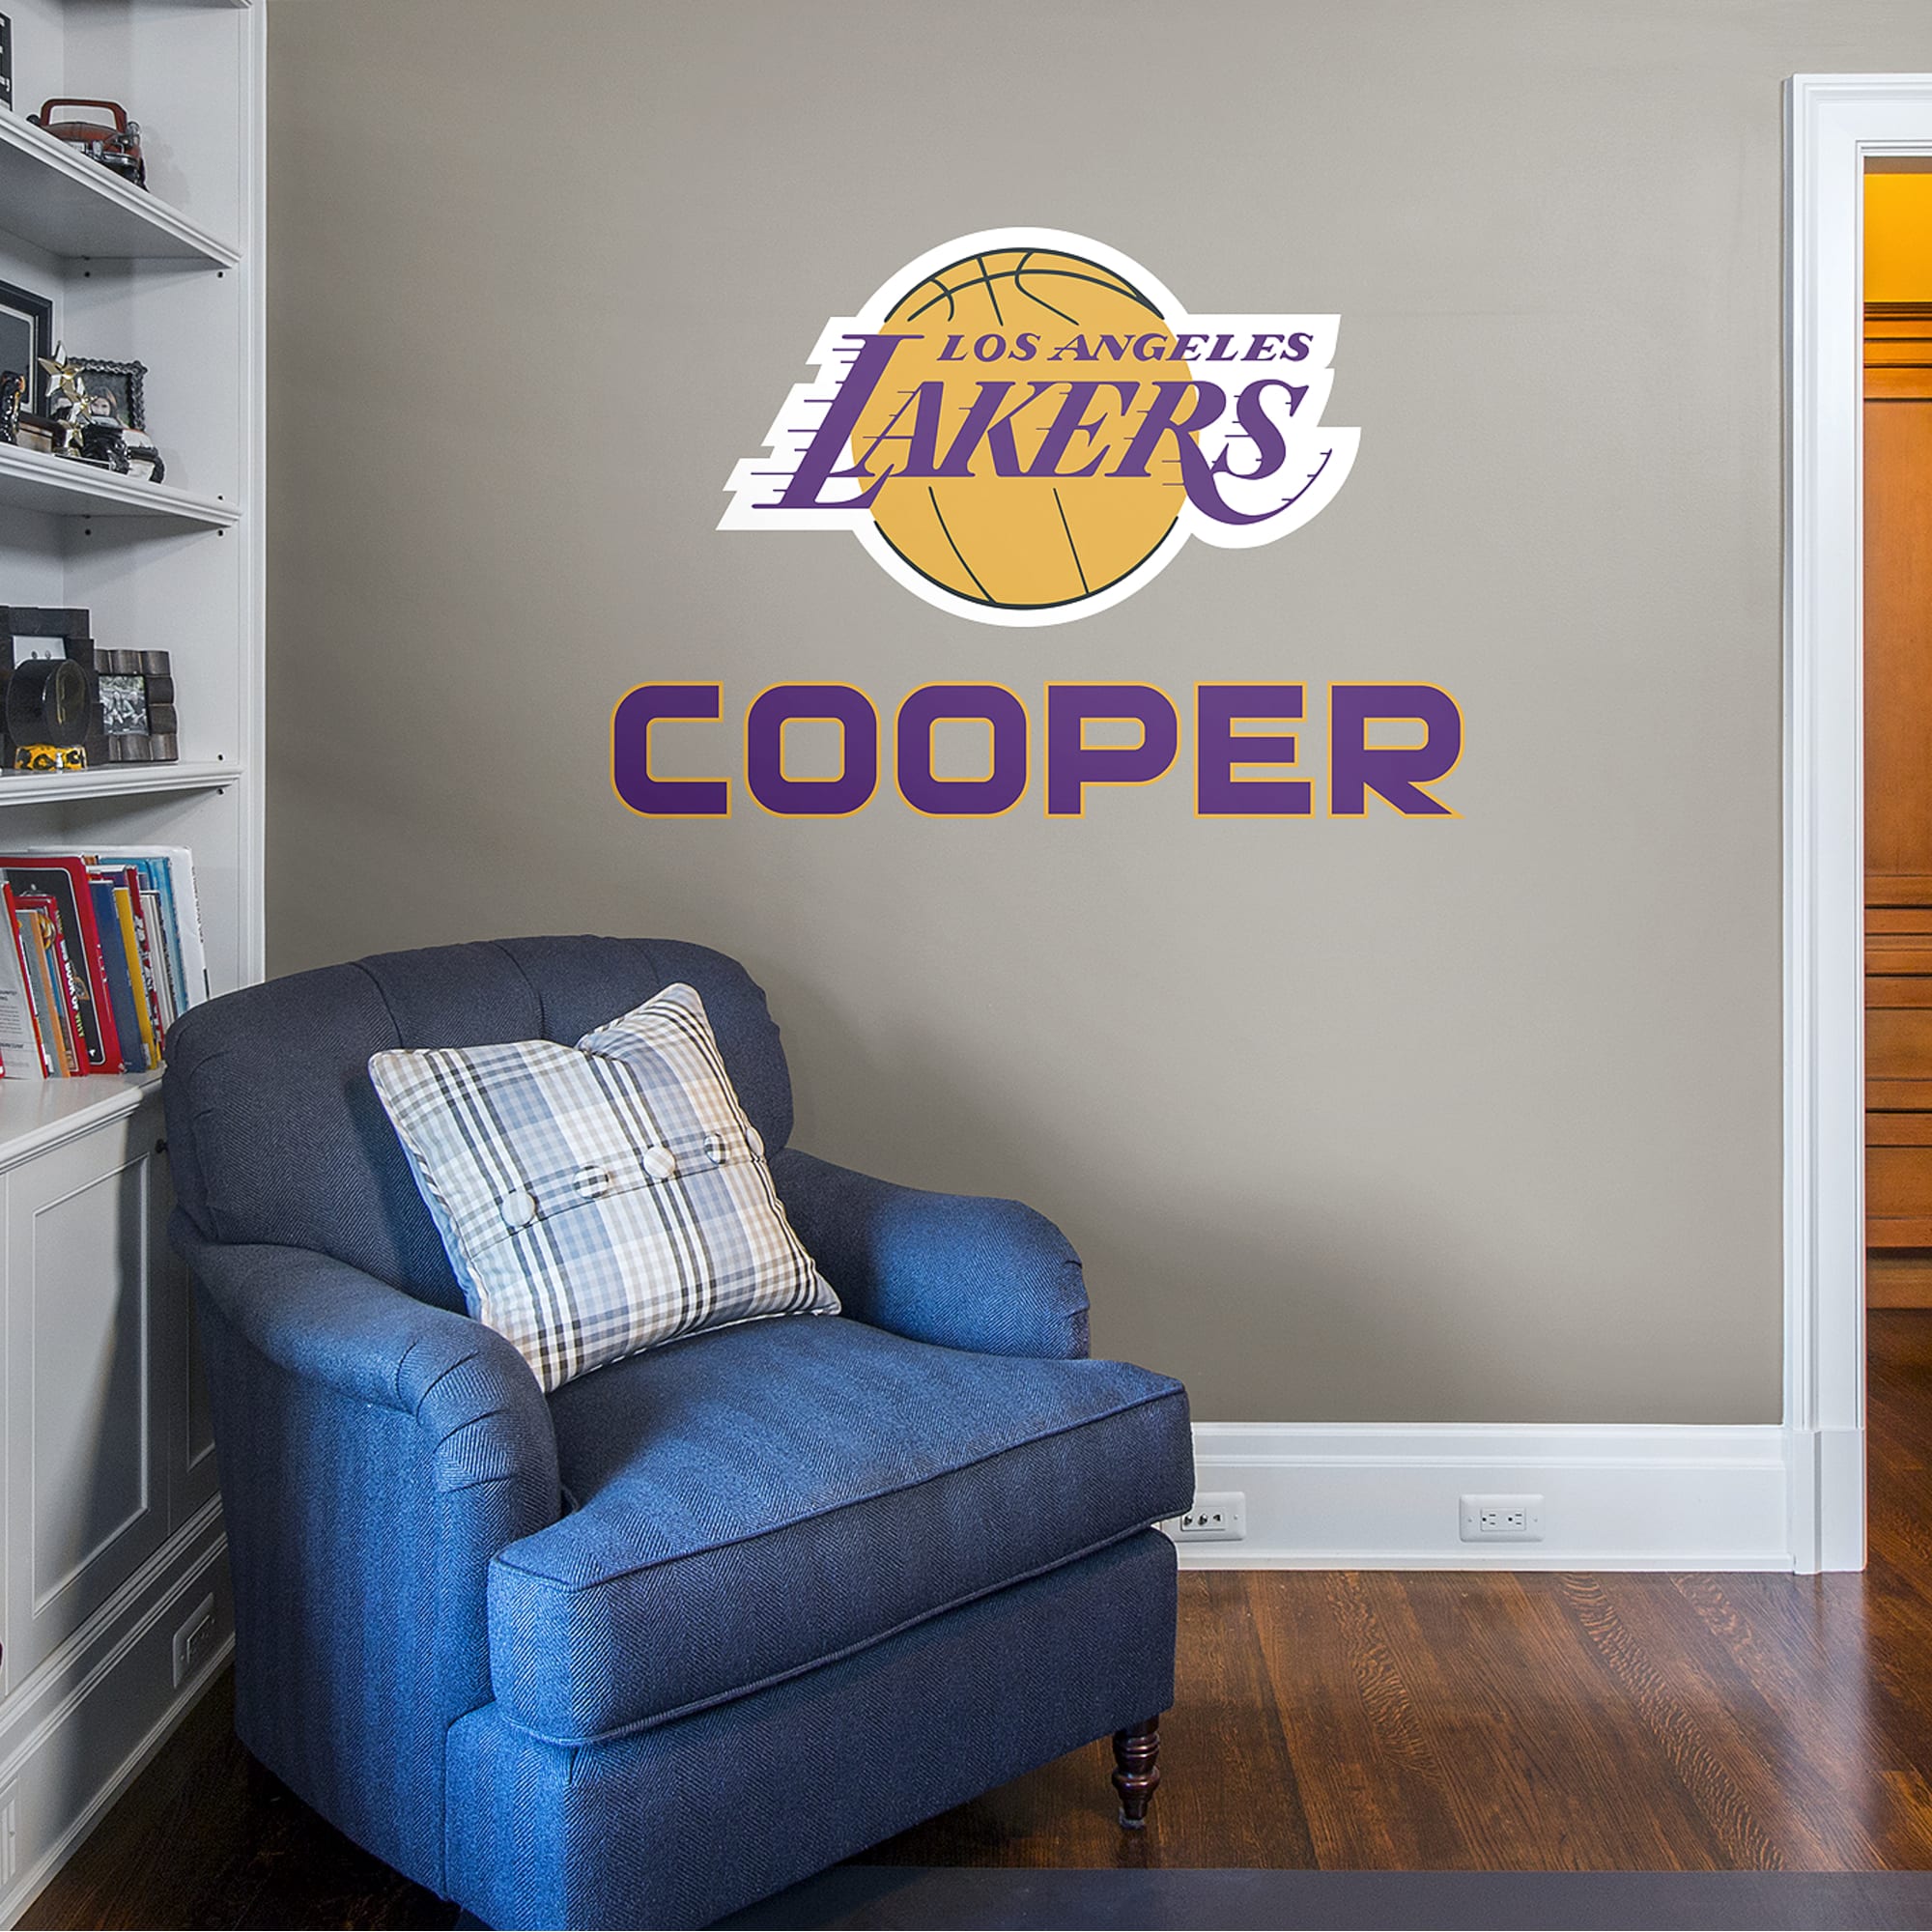 Los Angeles Lakers: Stacked Personalized Name - Officially Licensed NBA Transfer Decal in Purple (52"W x 39.5"H) by Fathead | Vi